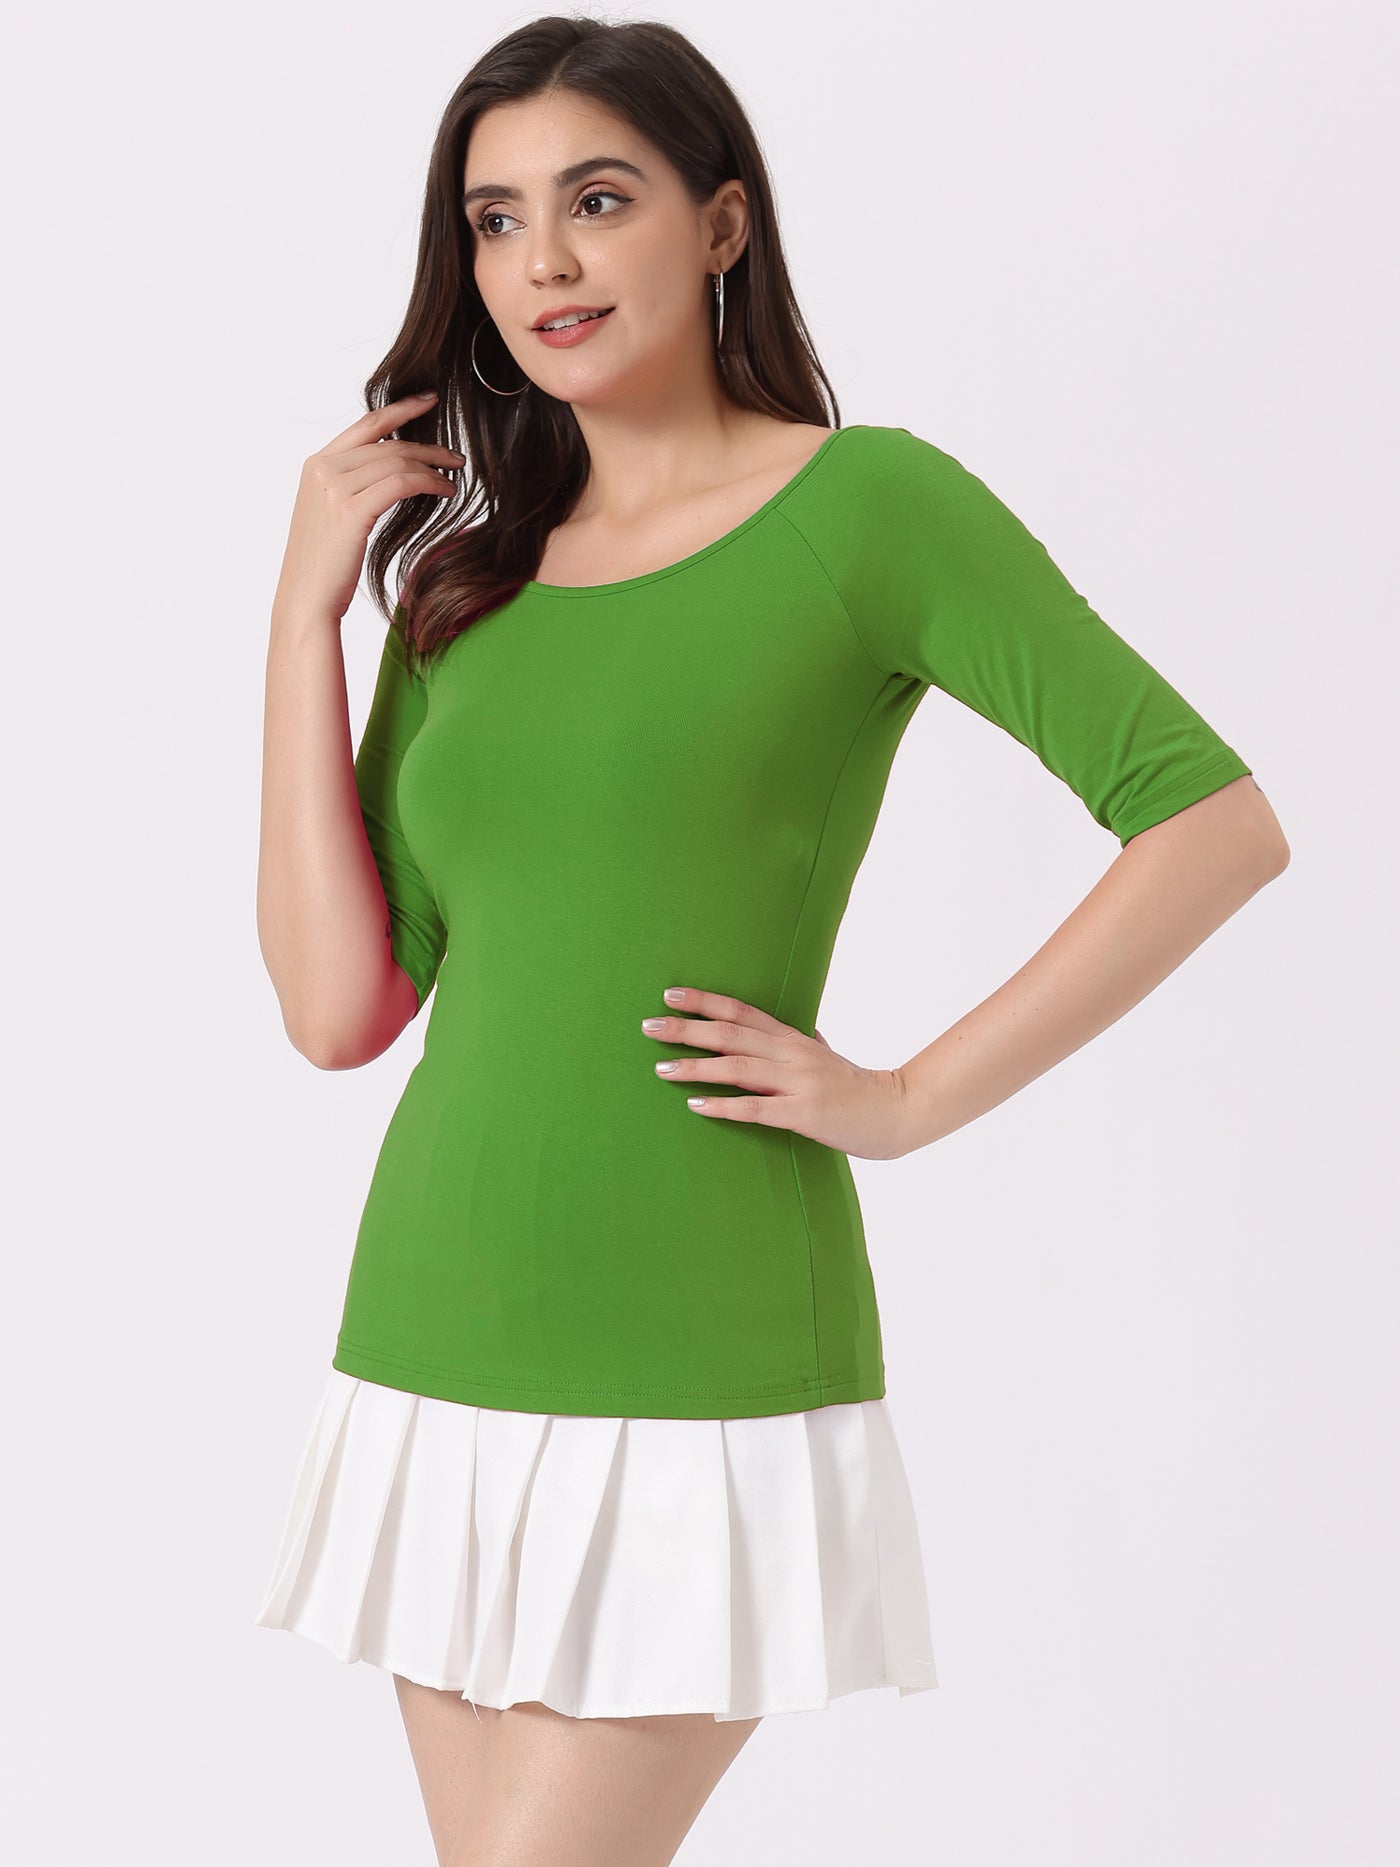 Allegra K Half Sleeves Scoop Neck Fitted Layering Soft T-Shirt